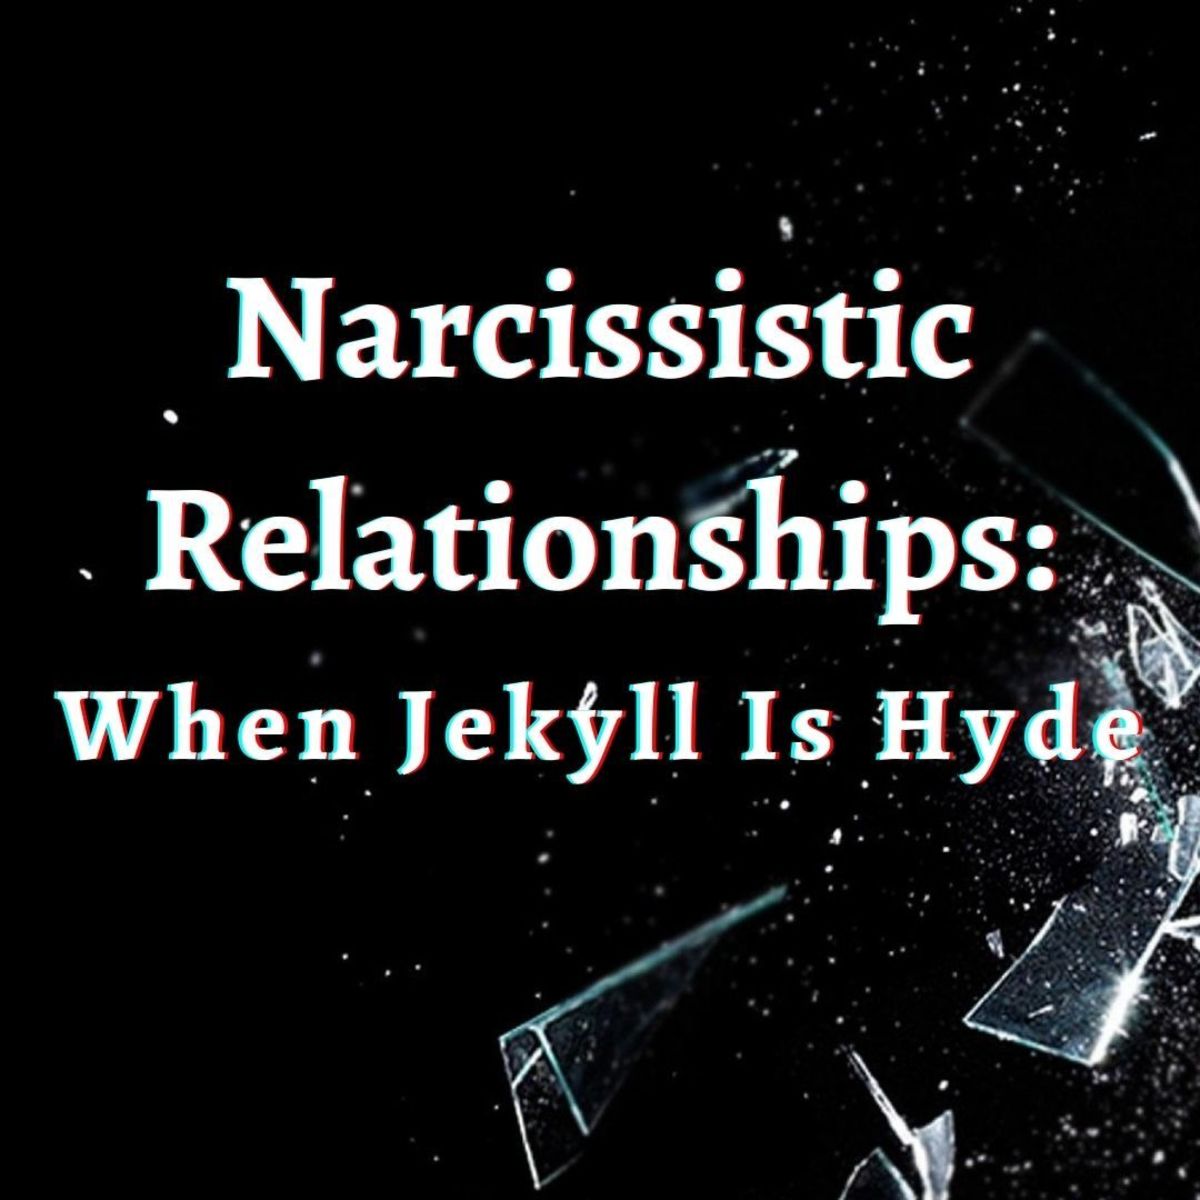 Narcissistic Relationships: Jekyll Is Hyde